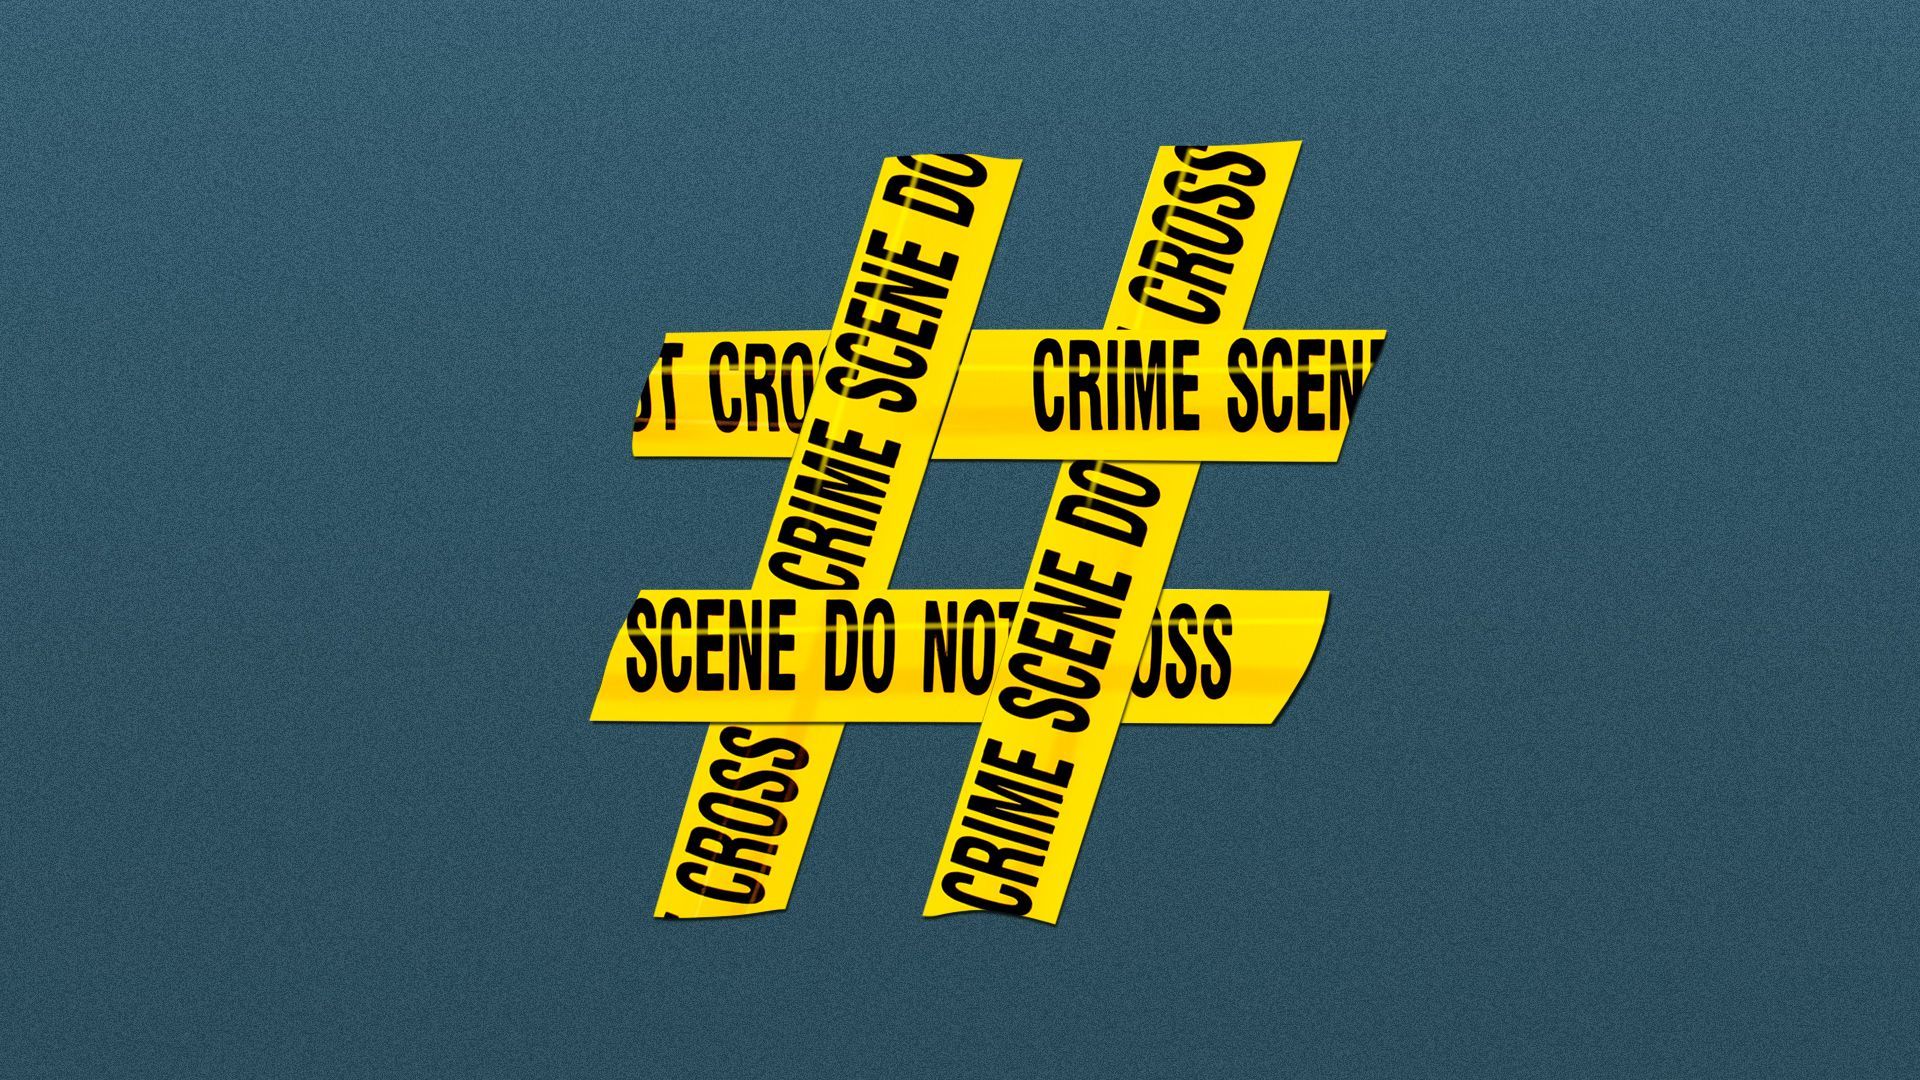 Illustration of a number sign made out of crime scene tape.